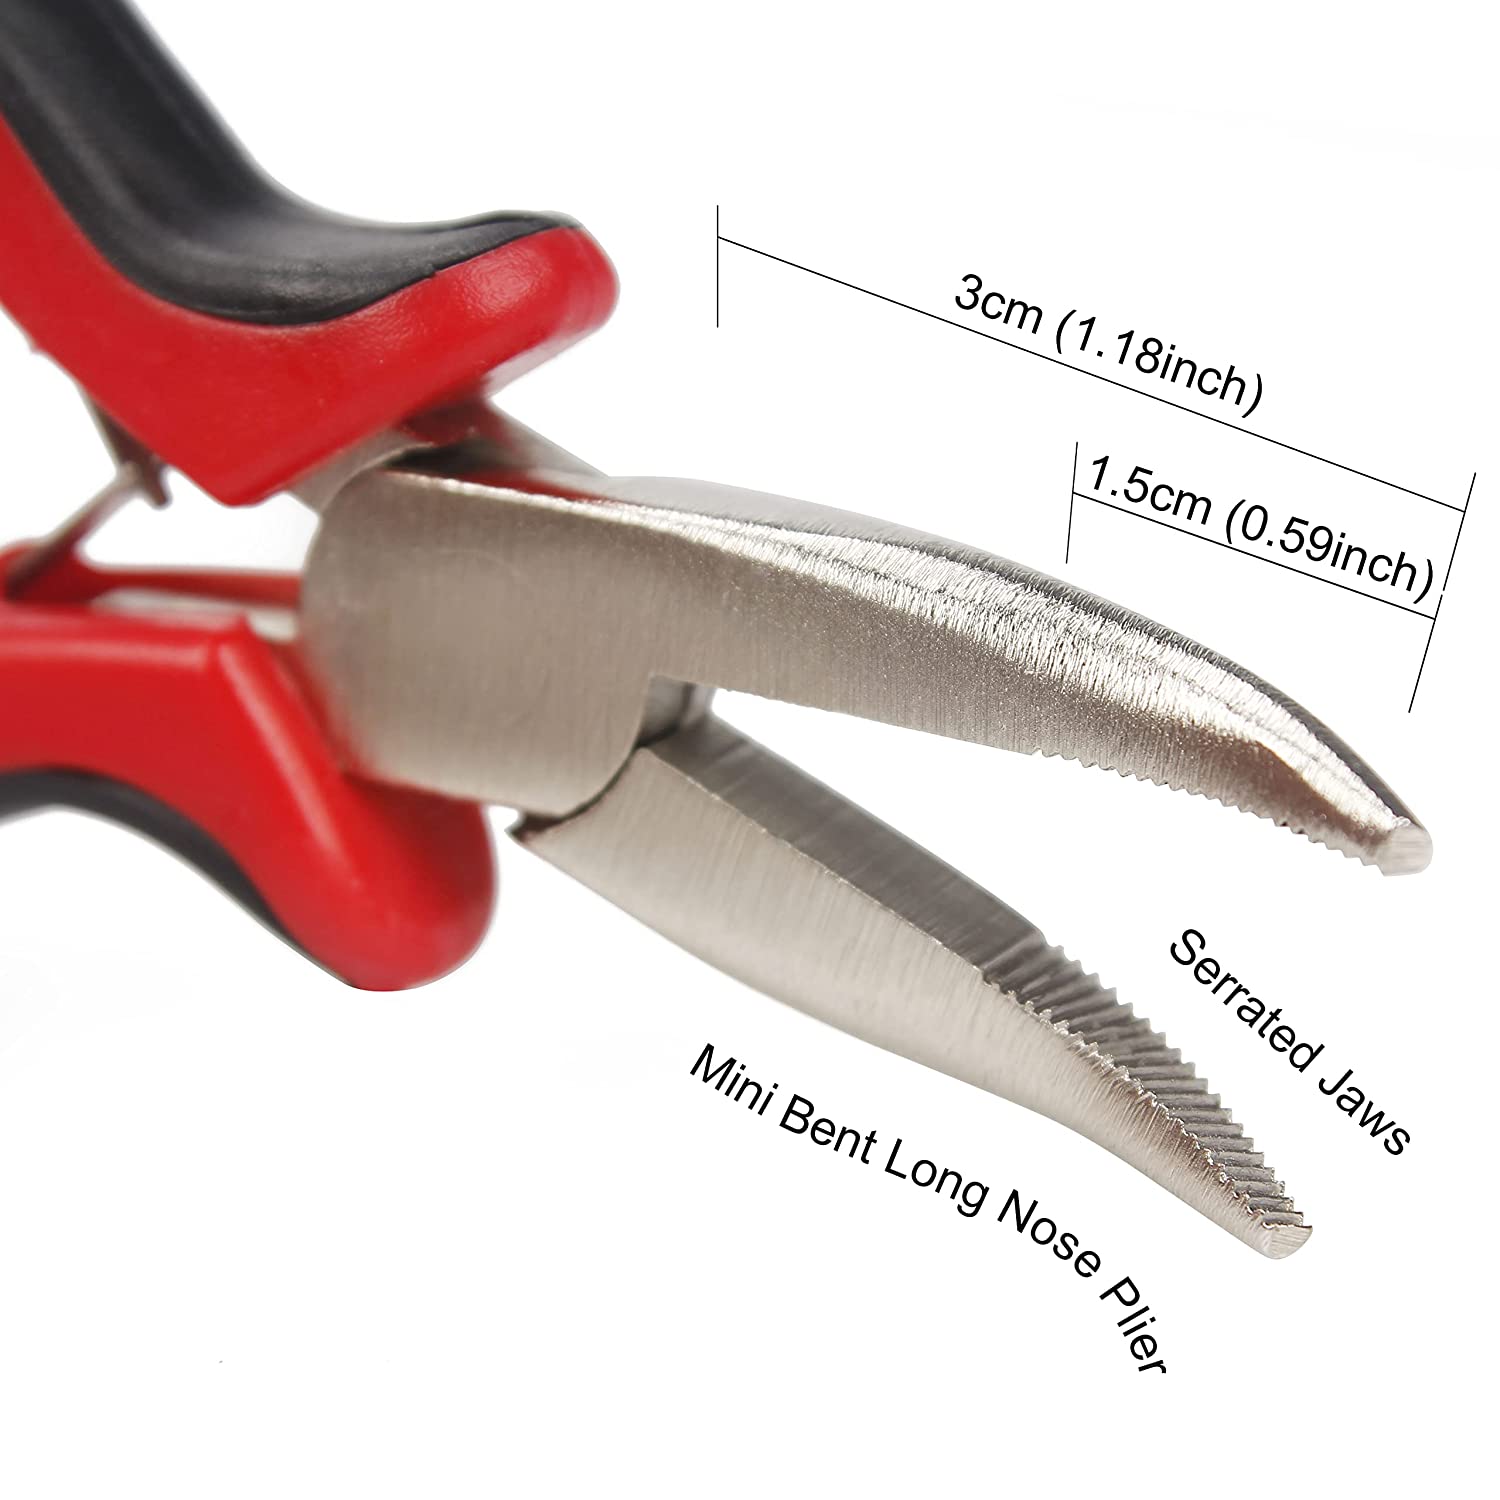 Needle Nose Pliers with Serrated Jaws Mini Bent Long Nose Plier for Micro Nano Ring Hair Extensions, Micro Link Hair Feather Extensions, Jewelry